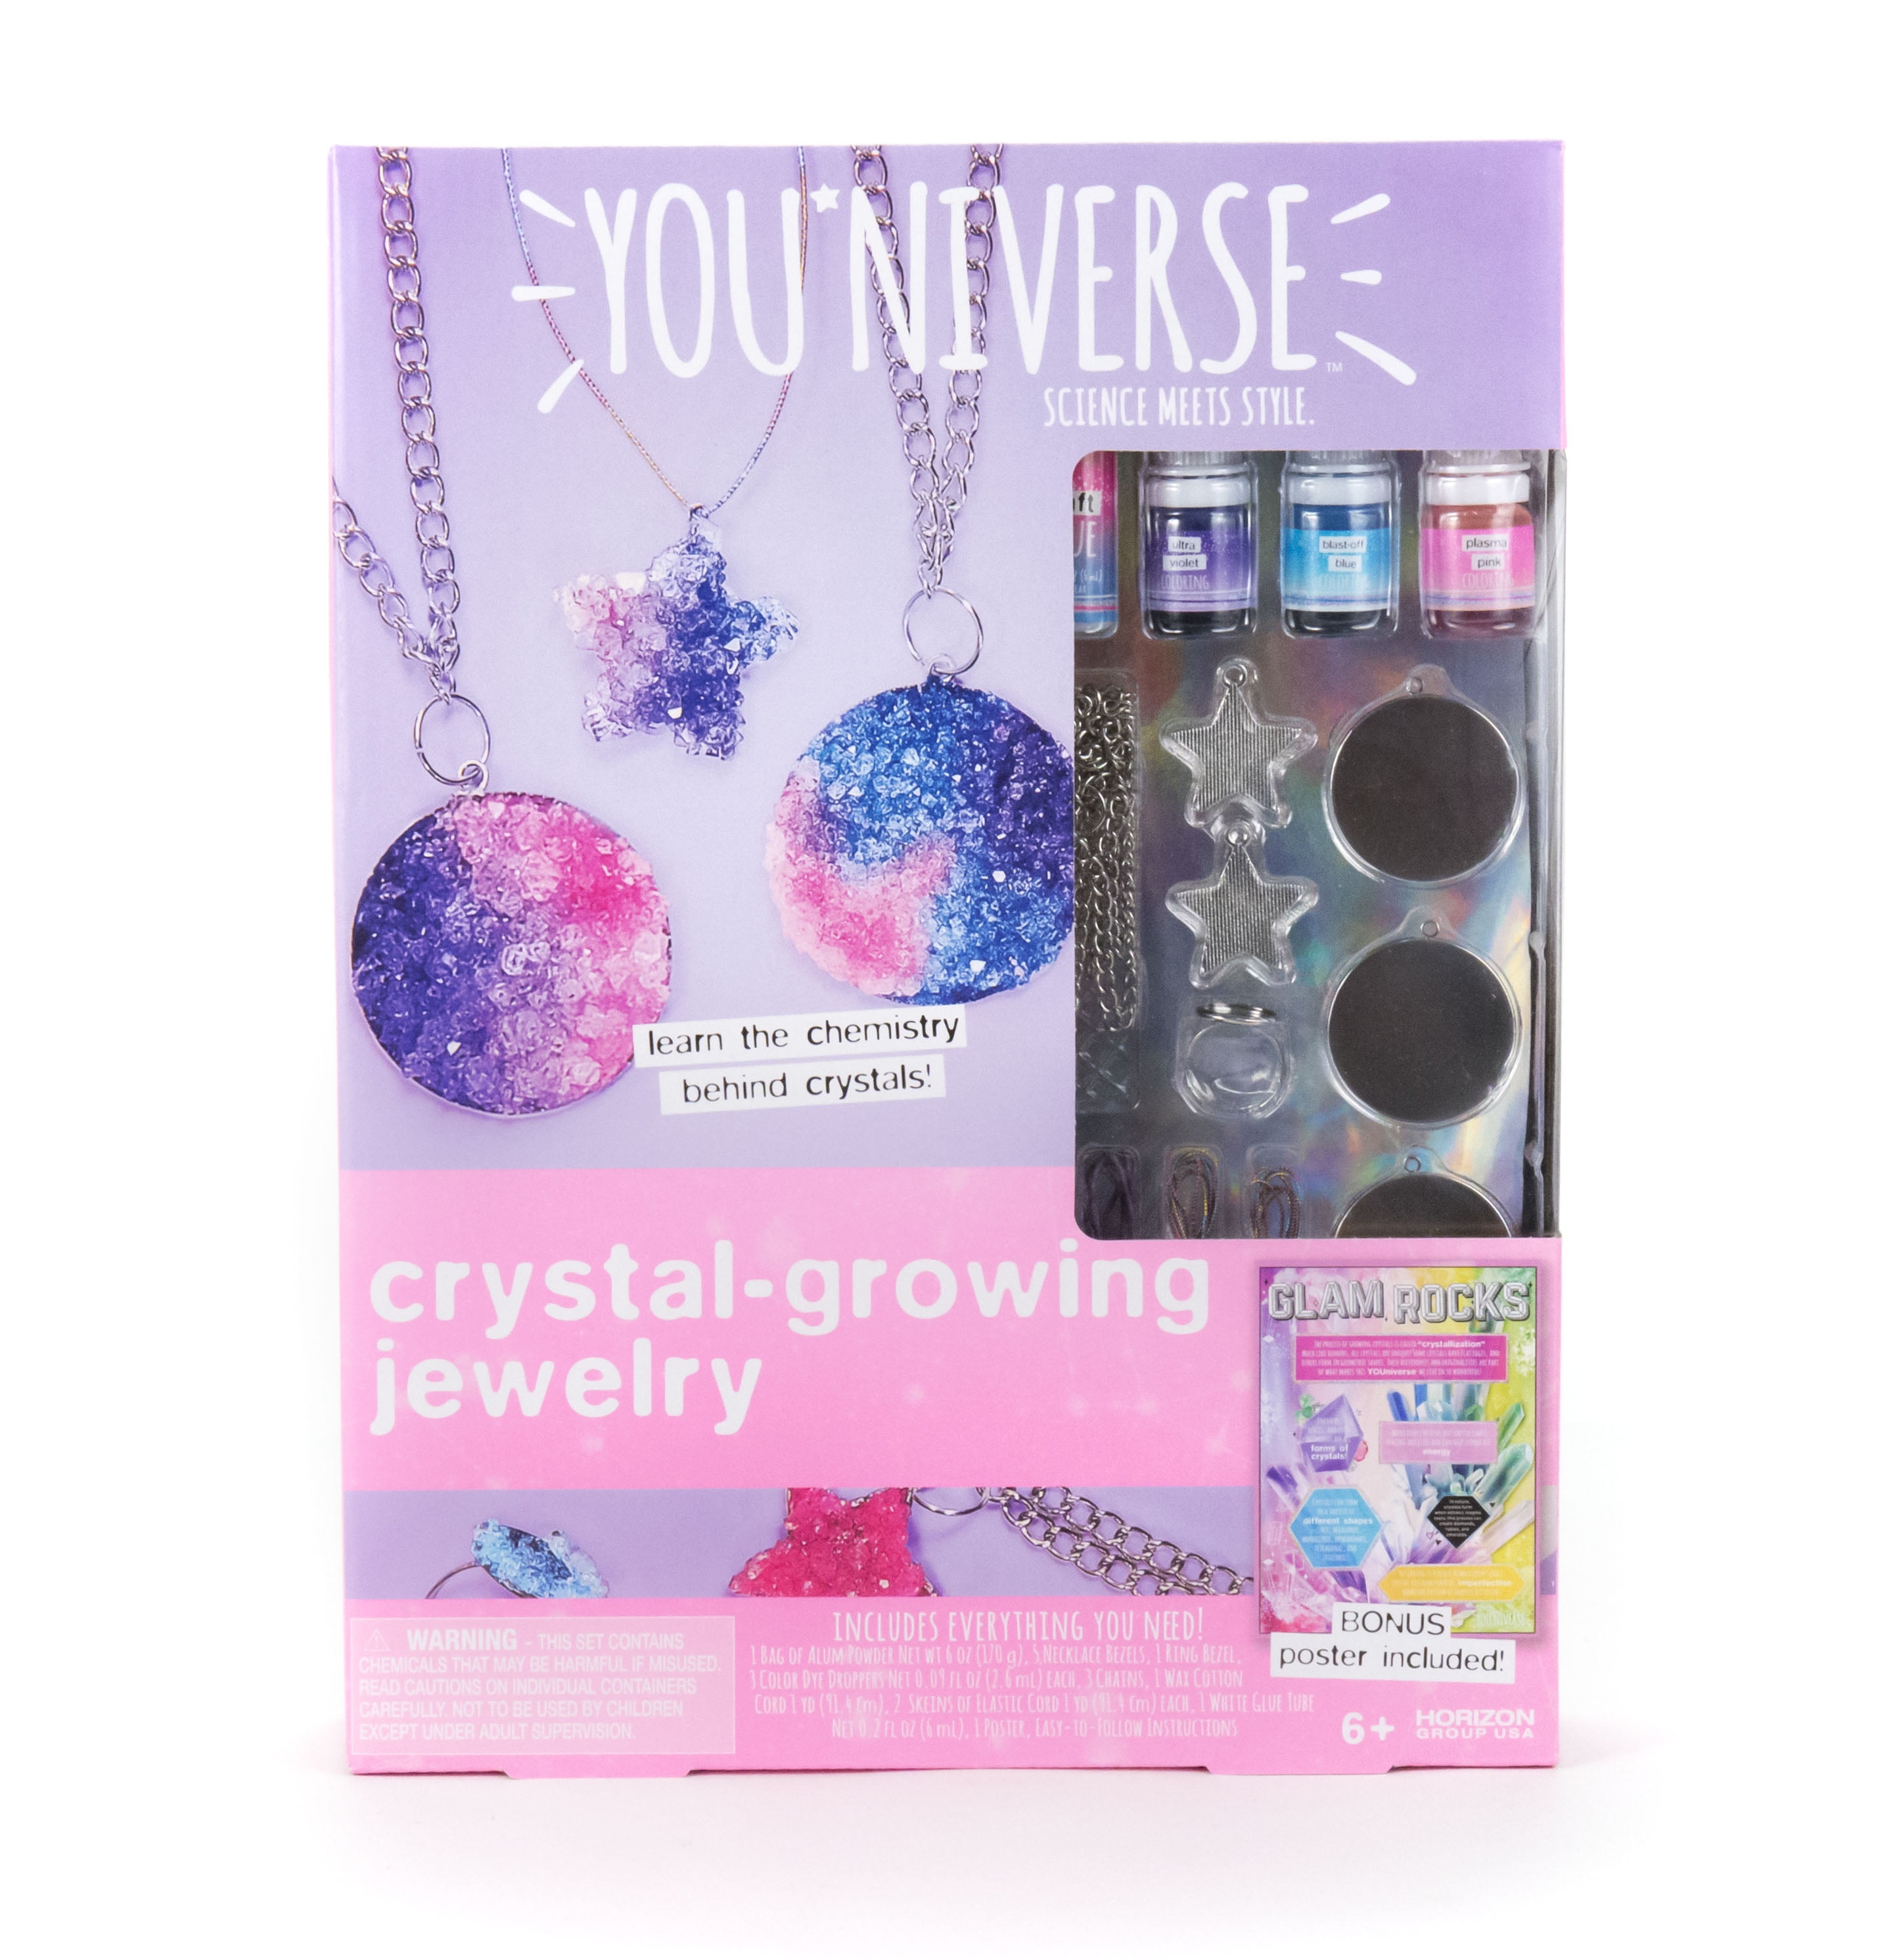 Youniverse Crystal Growing Jewelry Kit